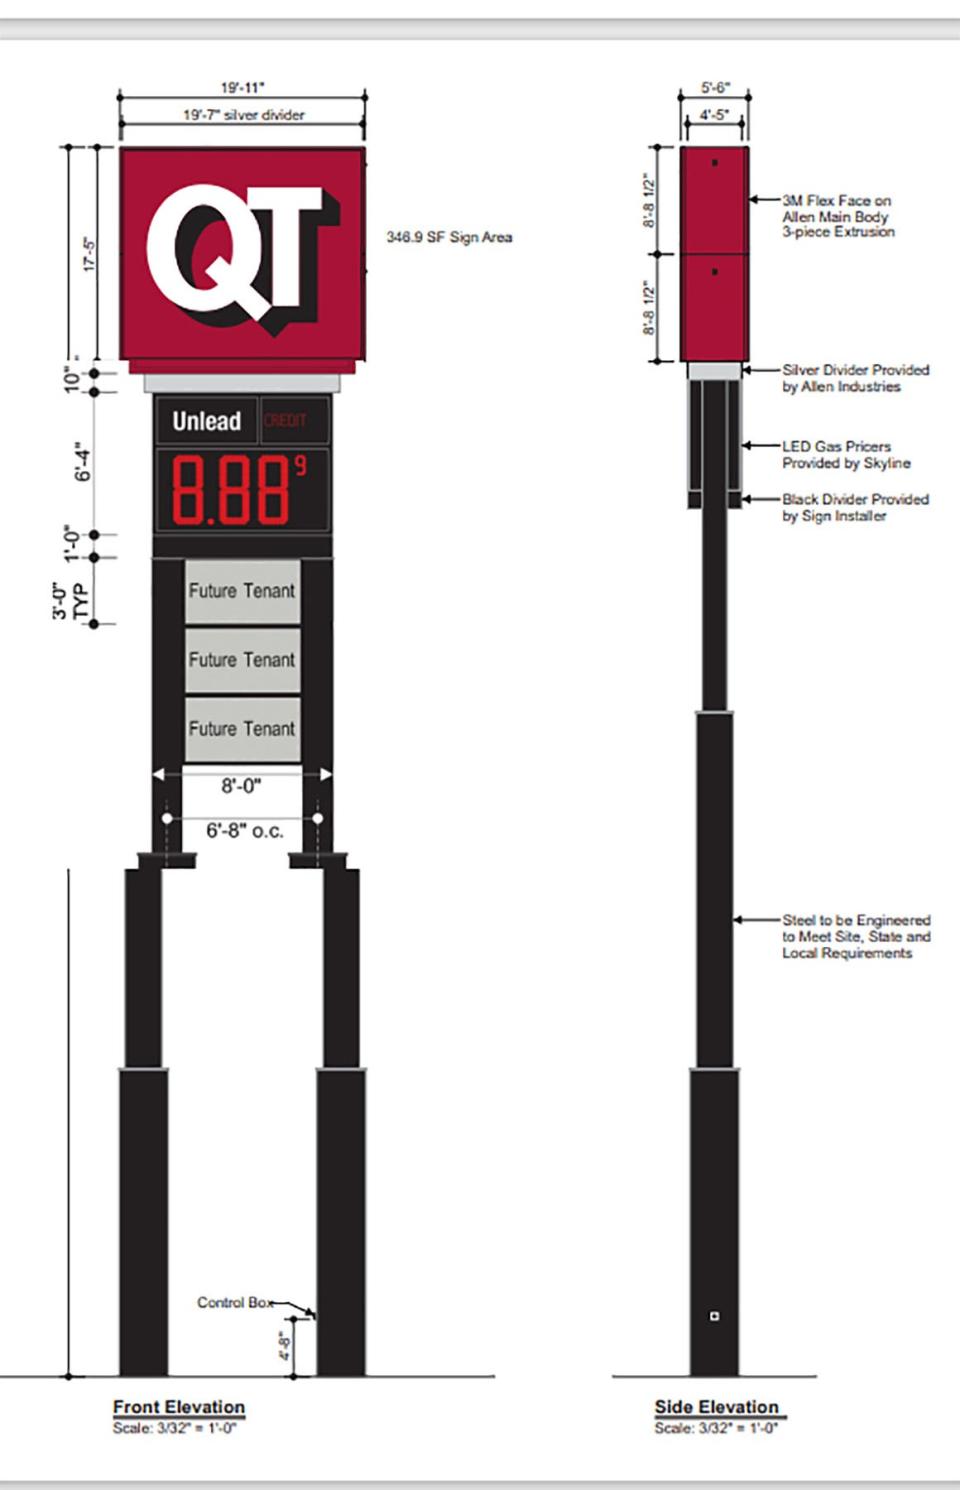 This graphic depicts a 75-foot tall sign approved for the new QuikTrip gas station being planned near 1-25 and West Pueblo Boulevard.